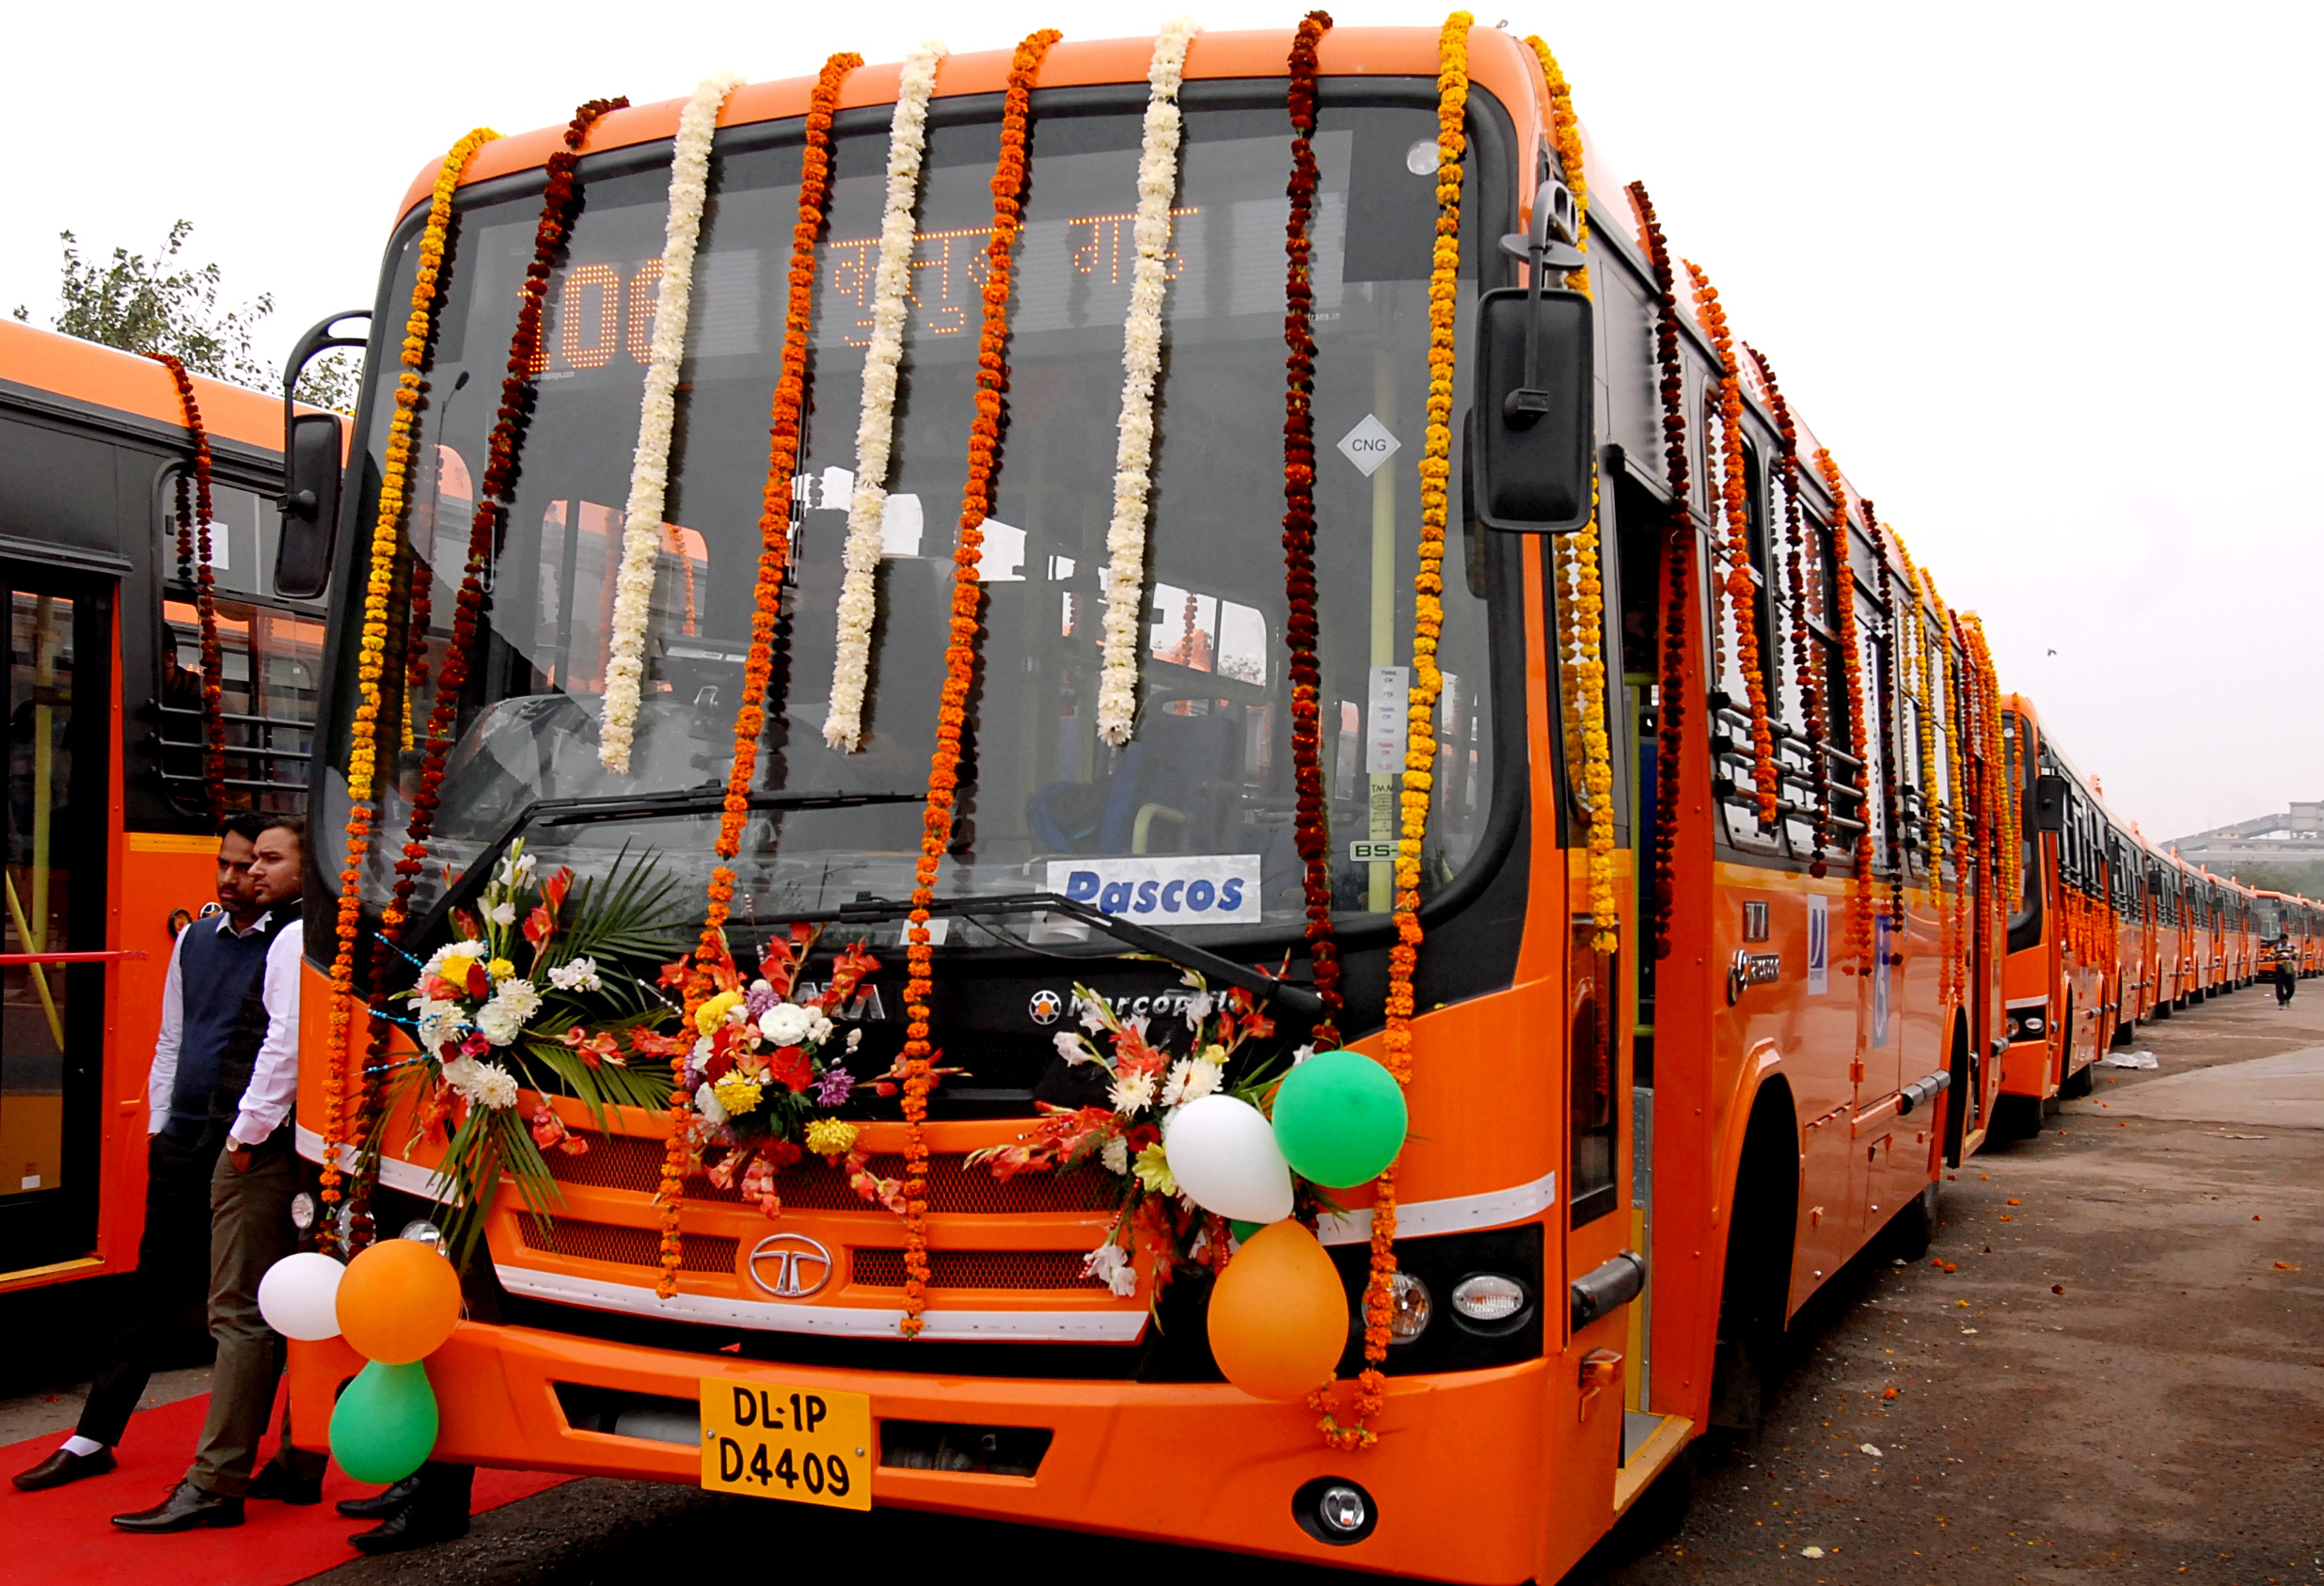 DTC Board gives nod to procure 1,250 low-floor buses